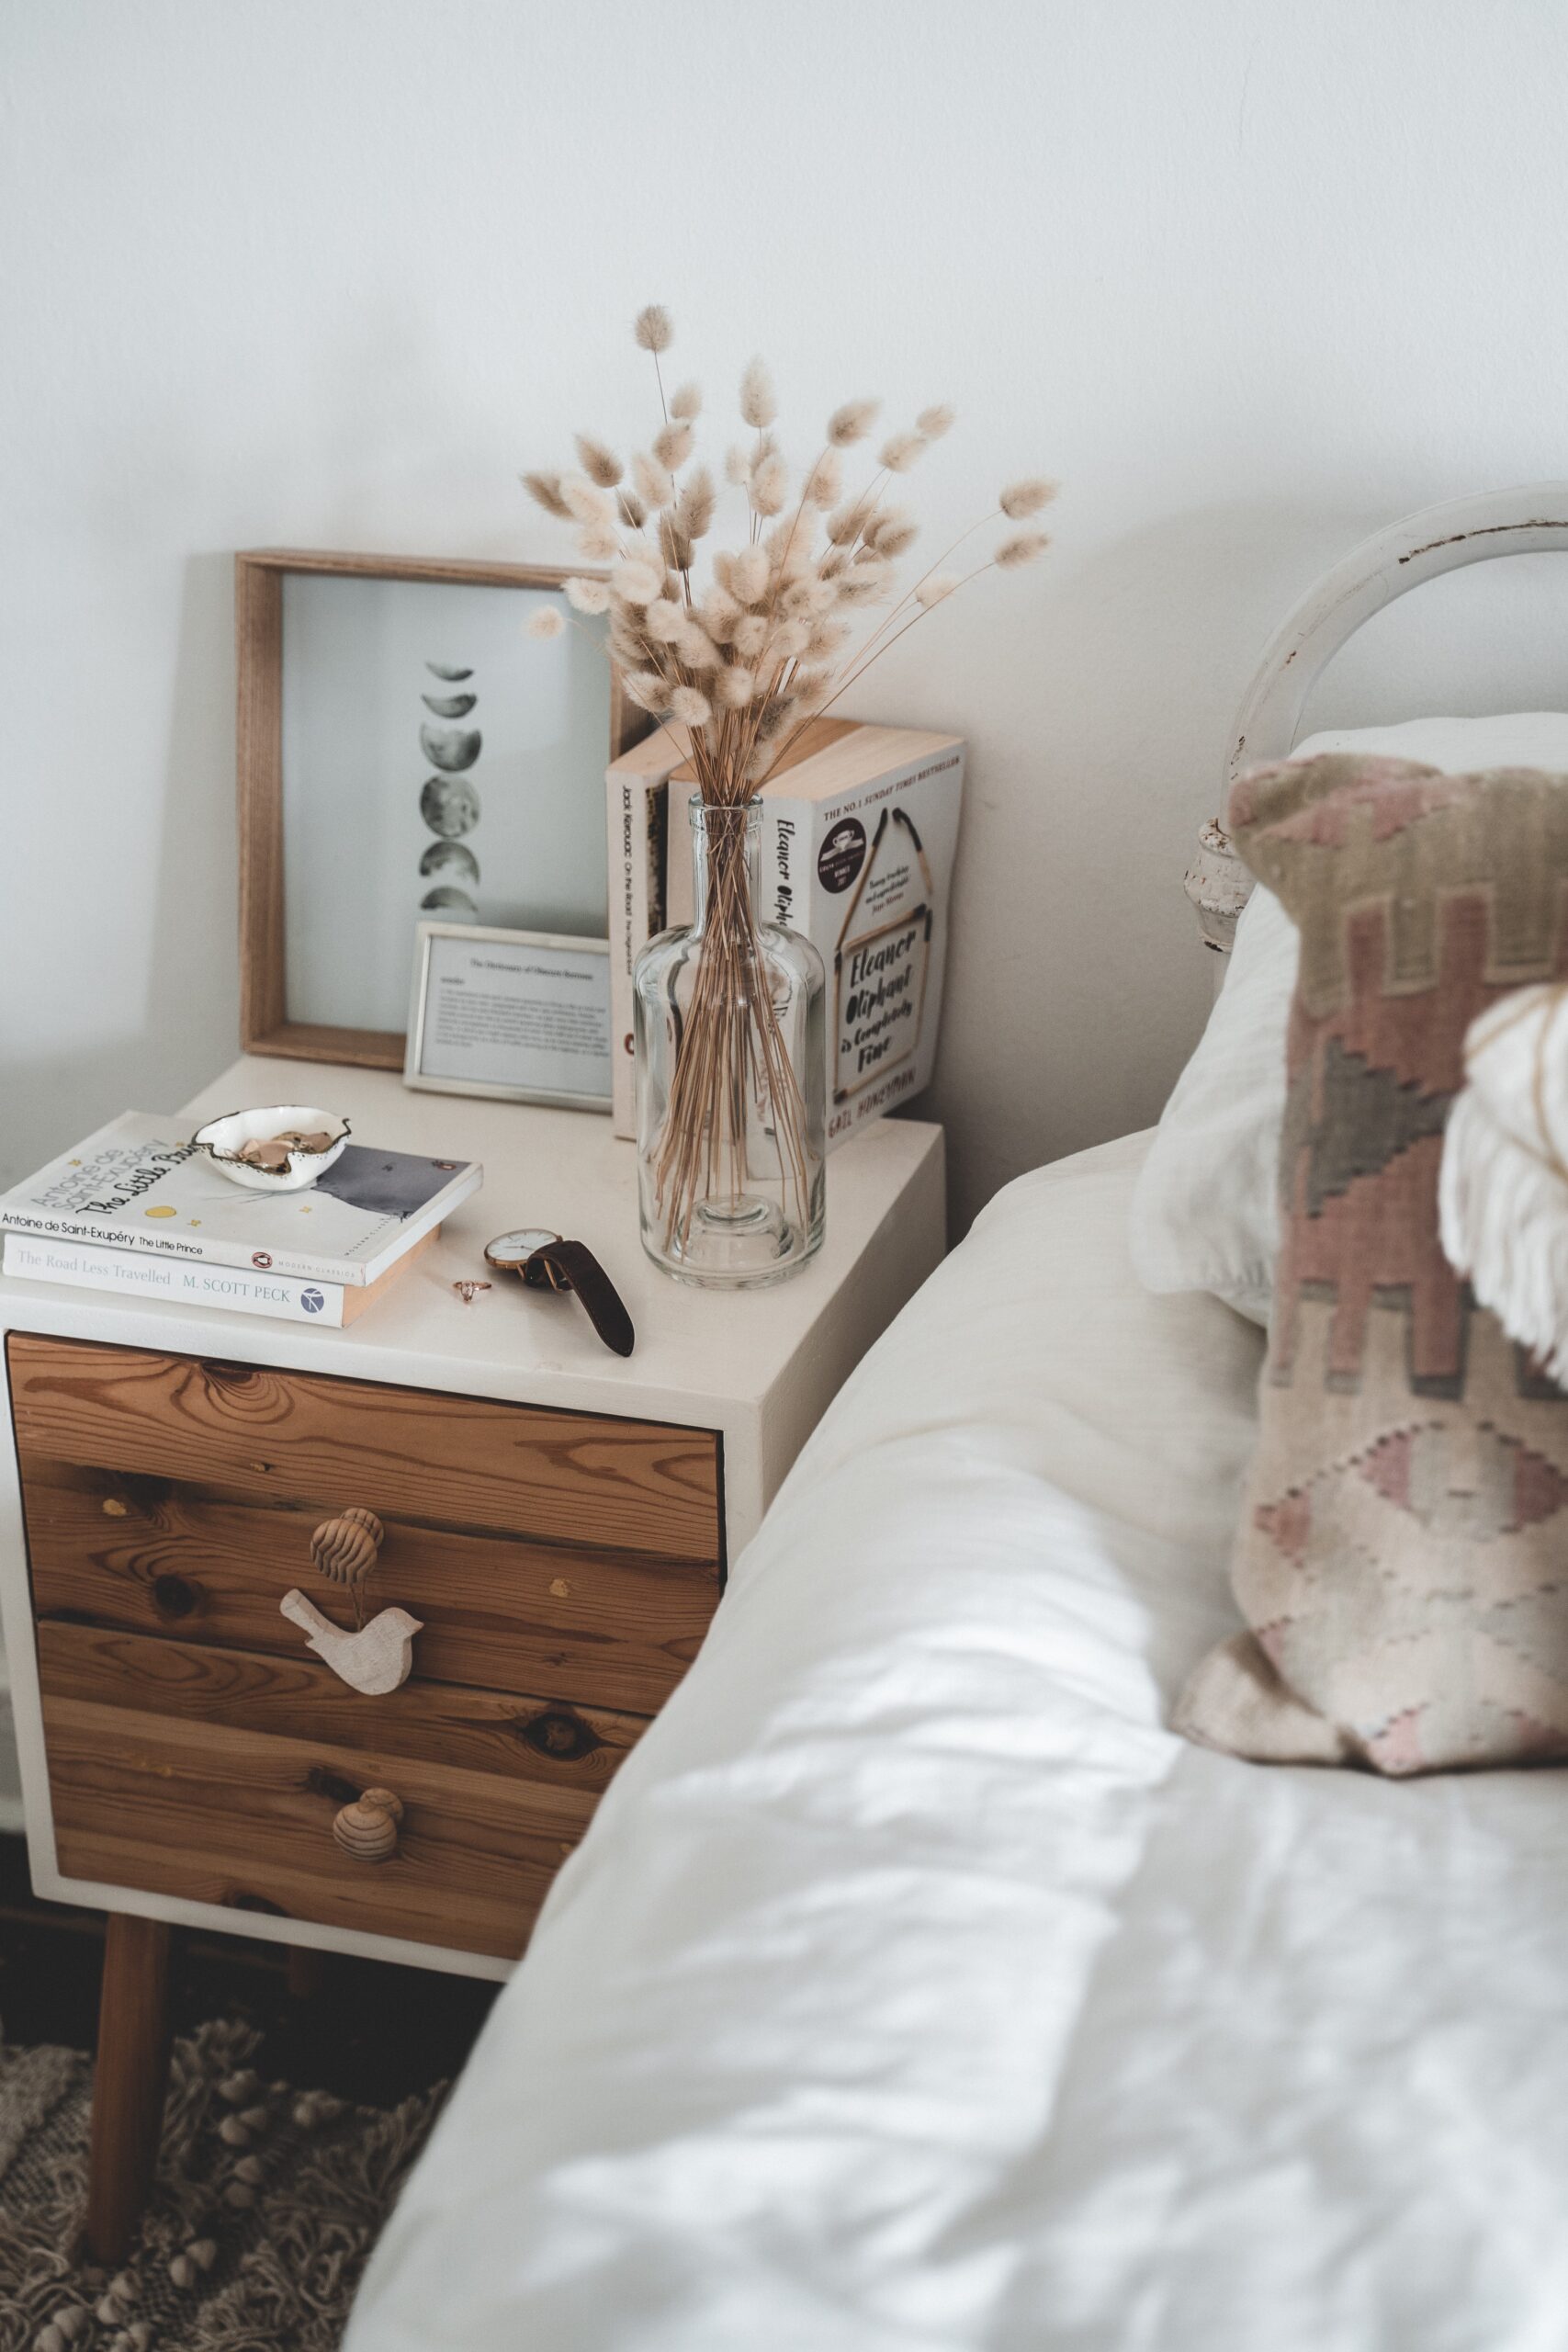 Calm bed with a farmhouse style bed side table containing books, a watch, a vase with dried flowers. 